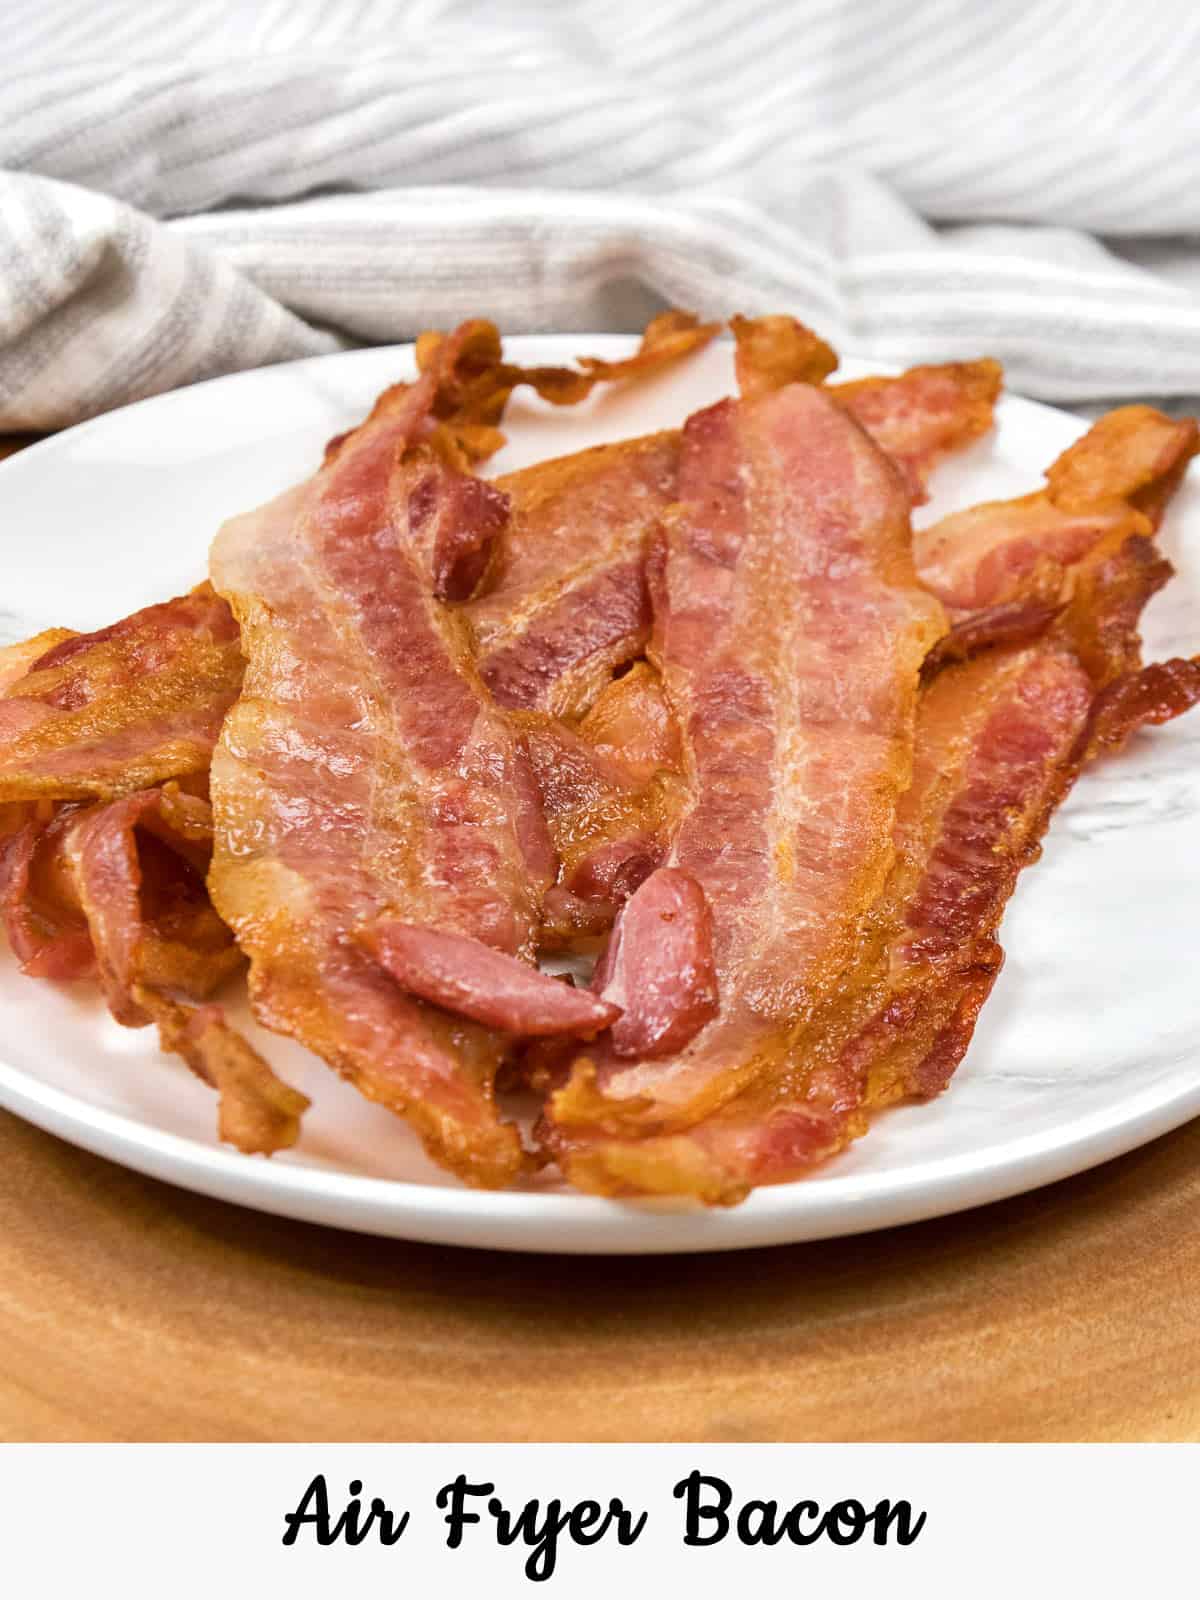 Bacon in the Air Fryer on a plate.